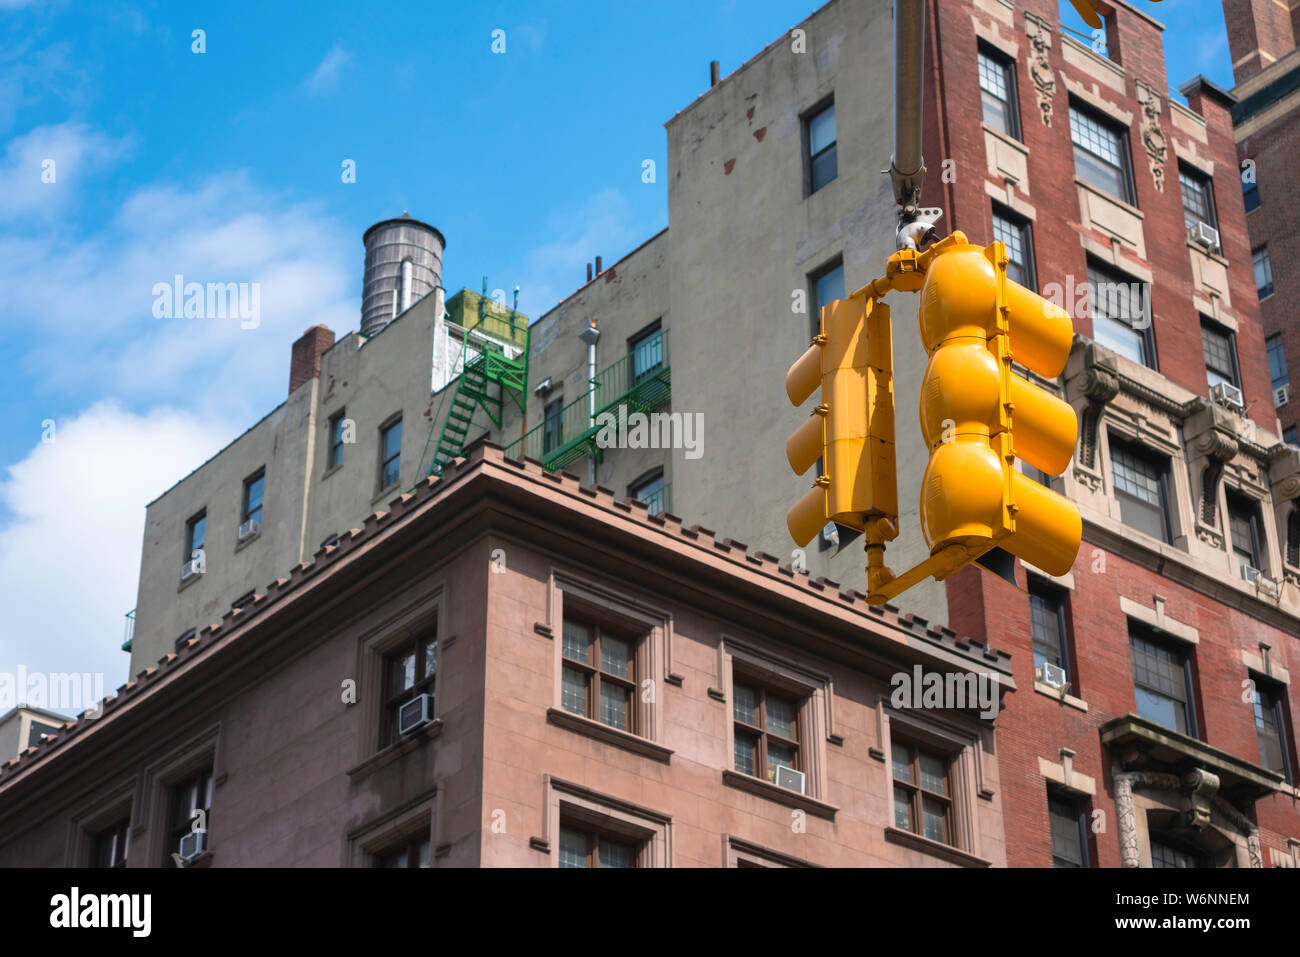 New York traffic light, view of a set of traffic lights suspended above MacDougal Street in the West Village, New York City, USA Stock Photo